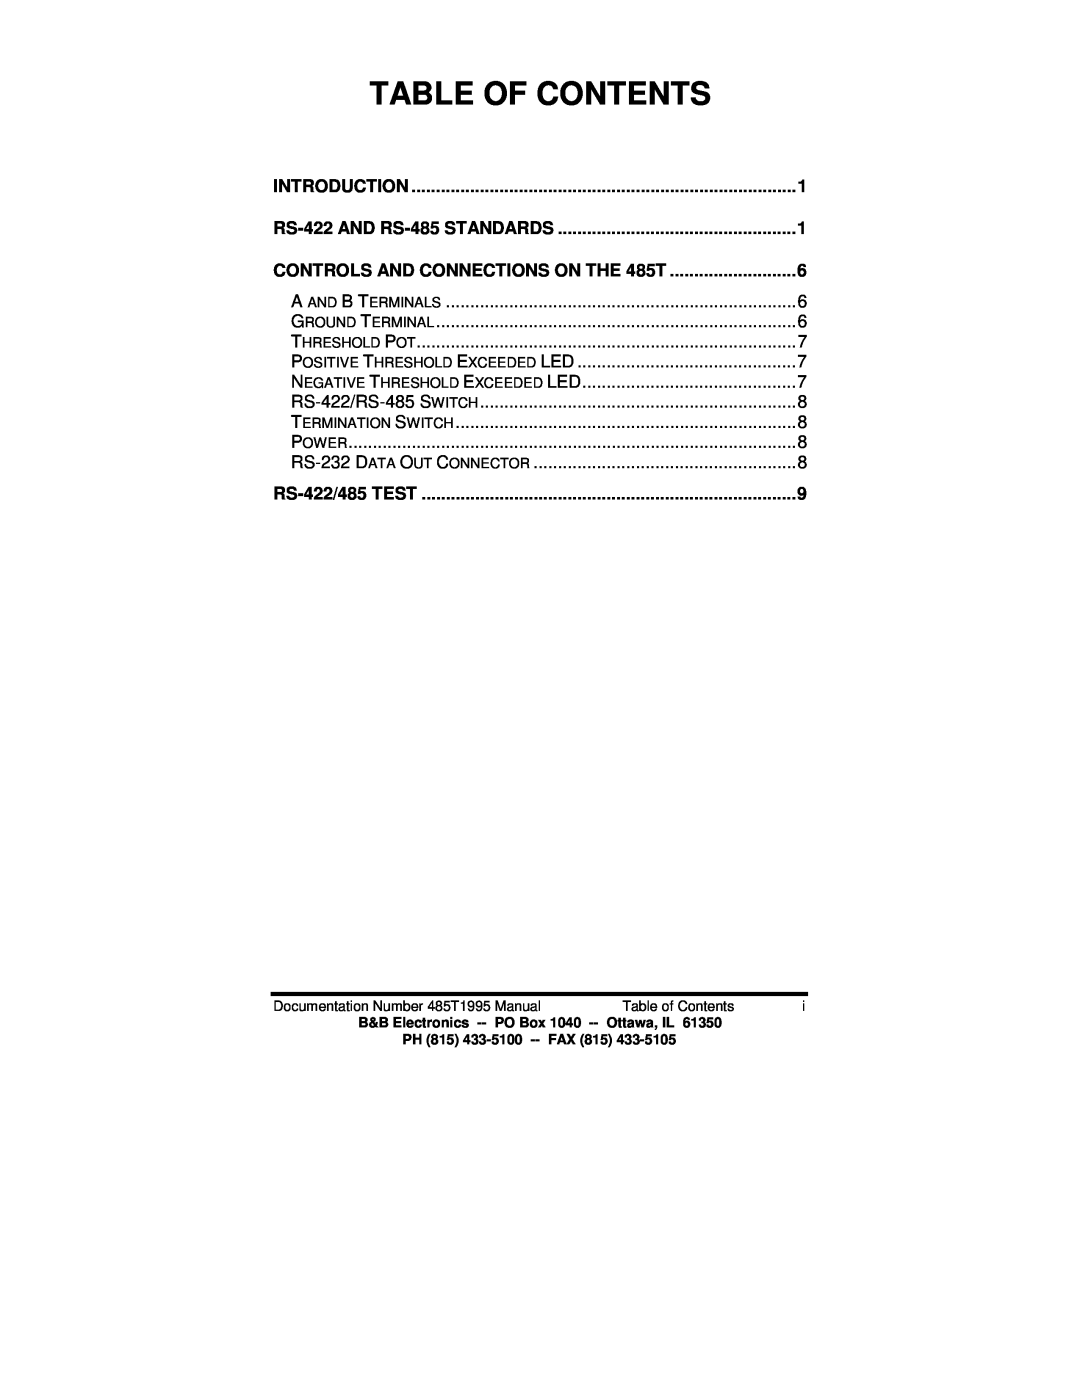 B&B Electronics CONTROLS AND CONNECTIONS ON THE 485T, Table Of Contents, Introduction, RS-422 AND RS-485 STANDARDS 